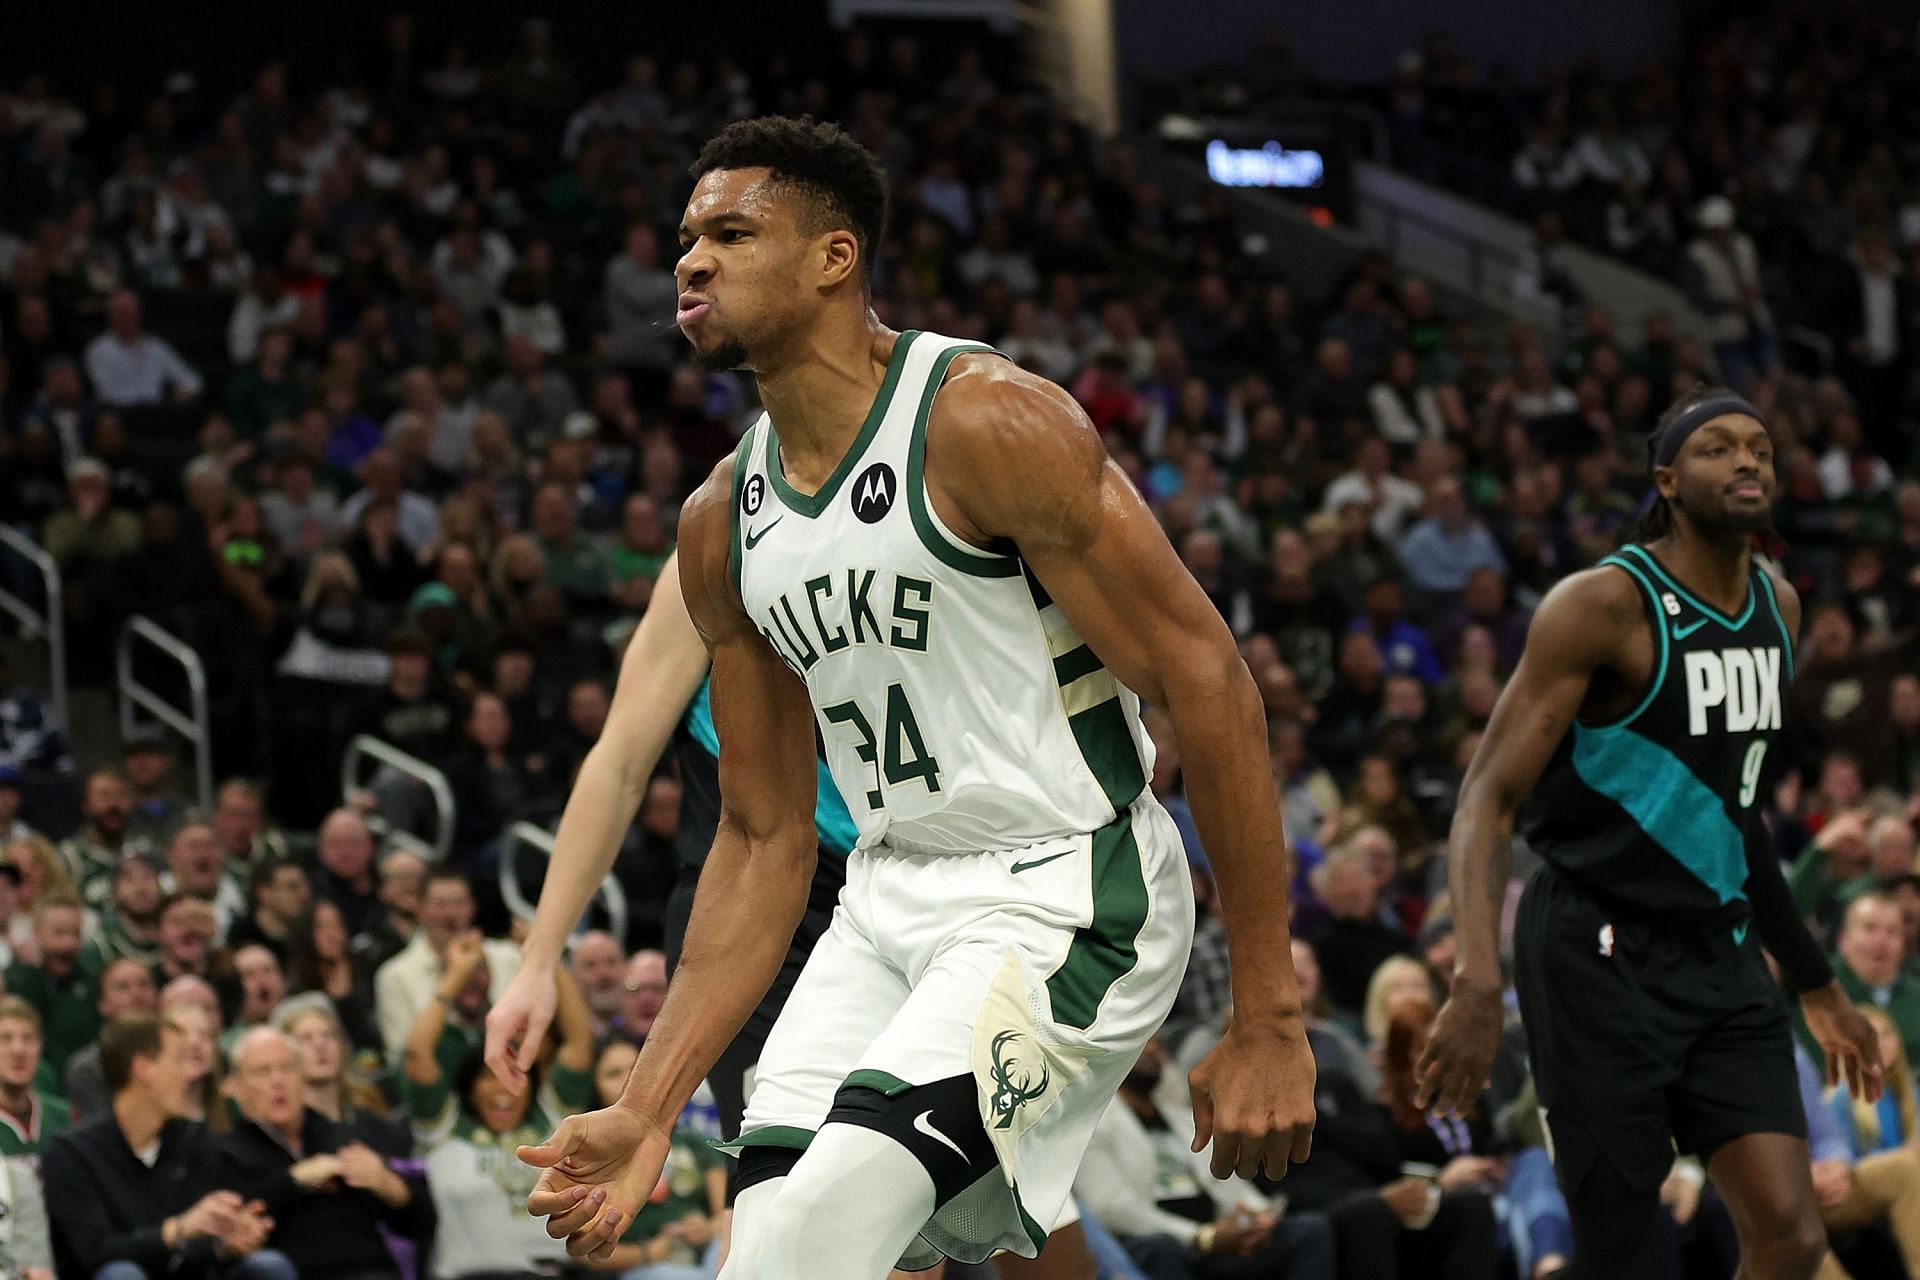 Milwaukee Bucks superstar forward Giannis Antetokounmpo continues to put up monster numbers